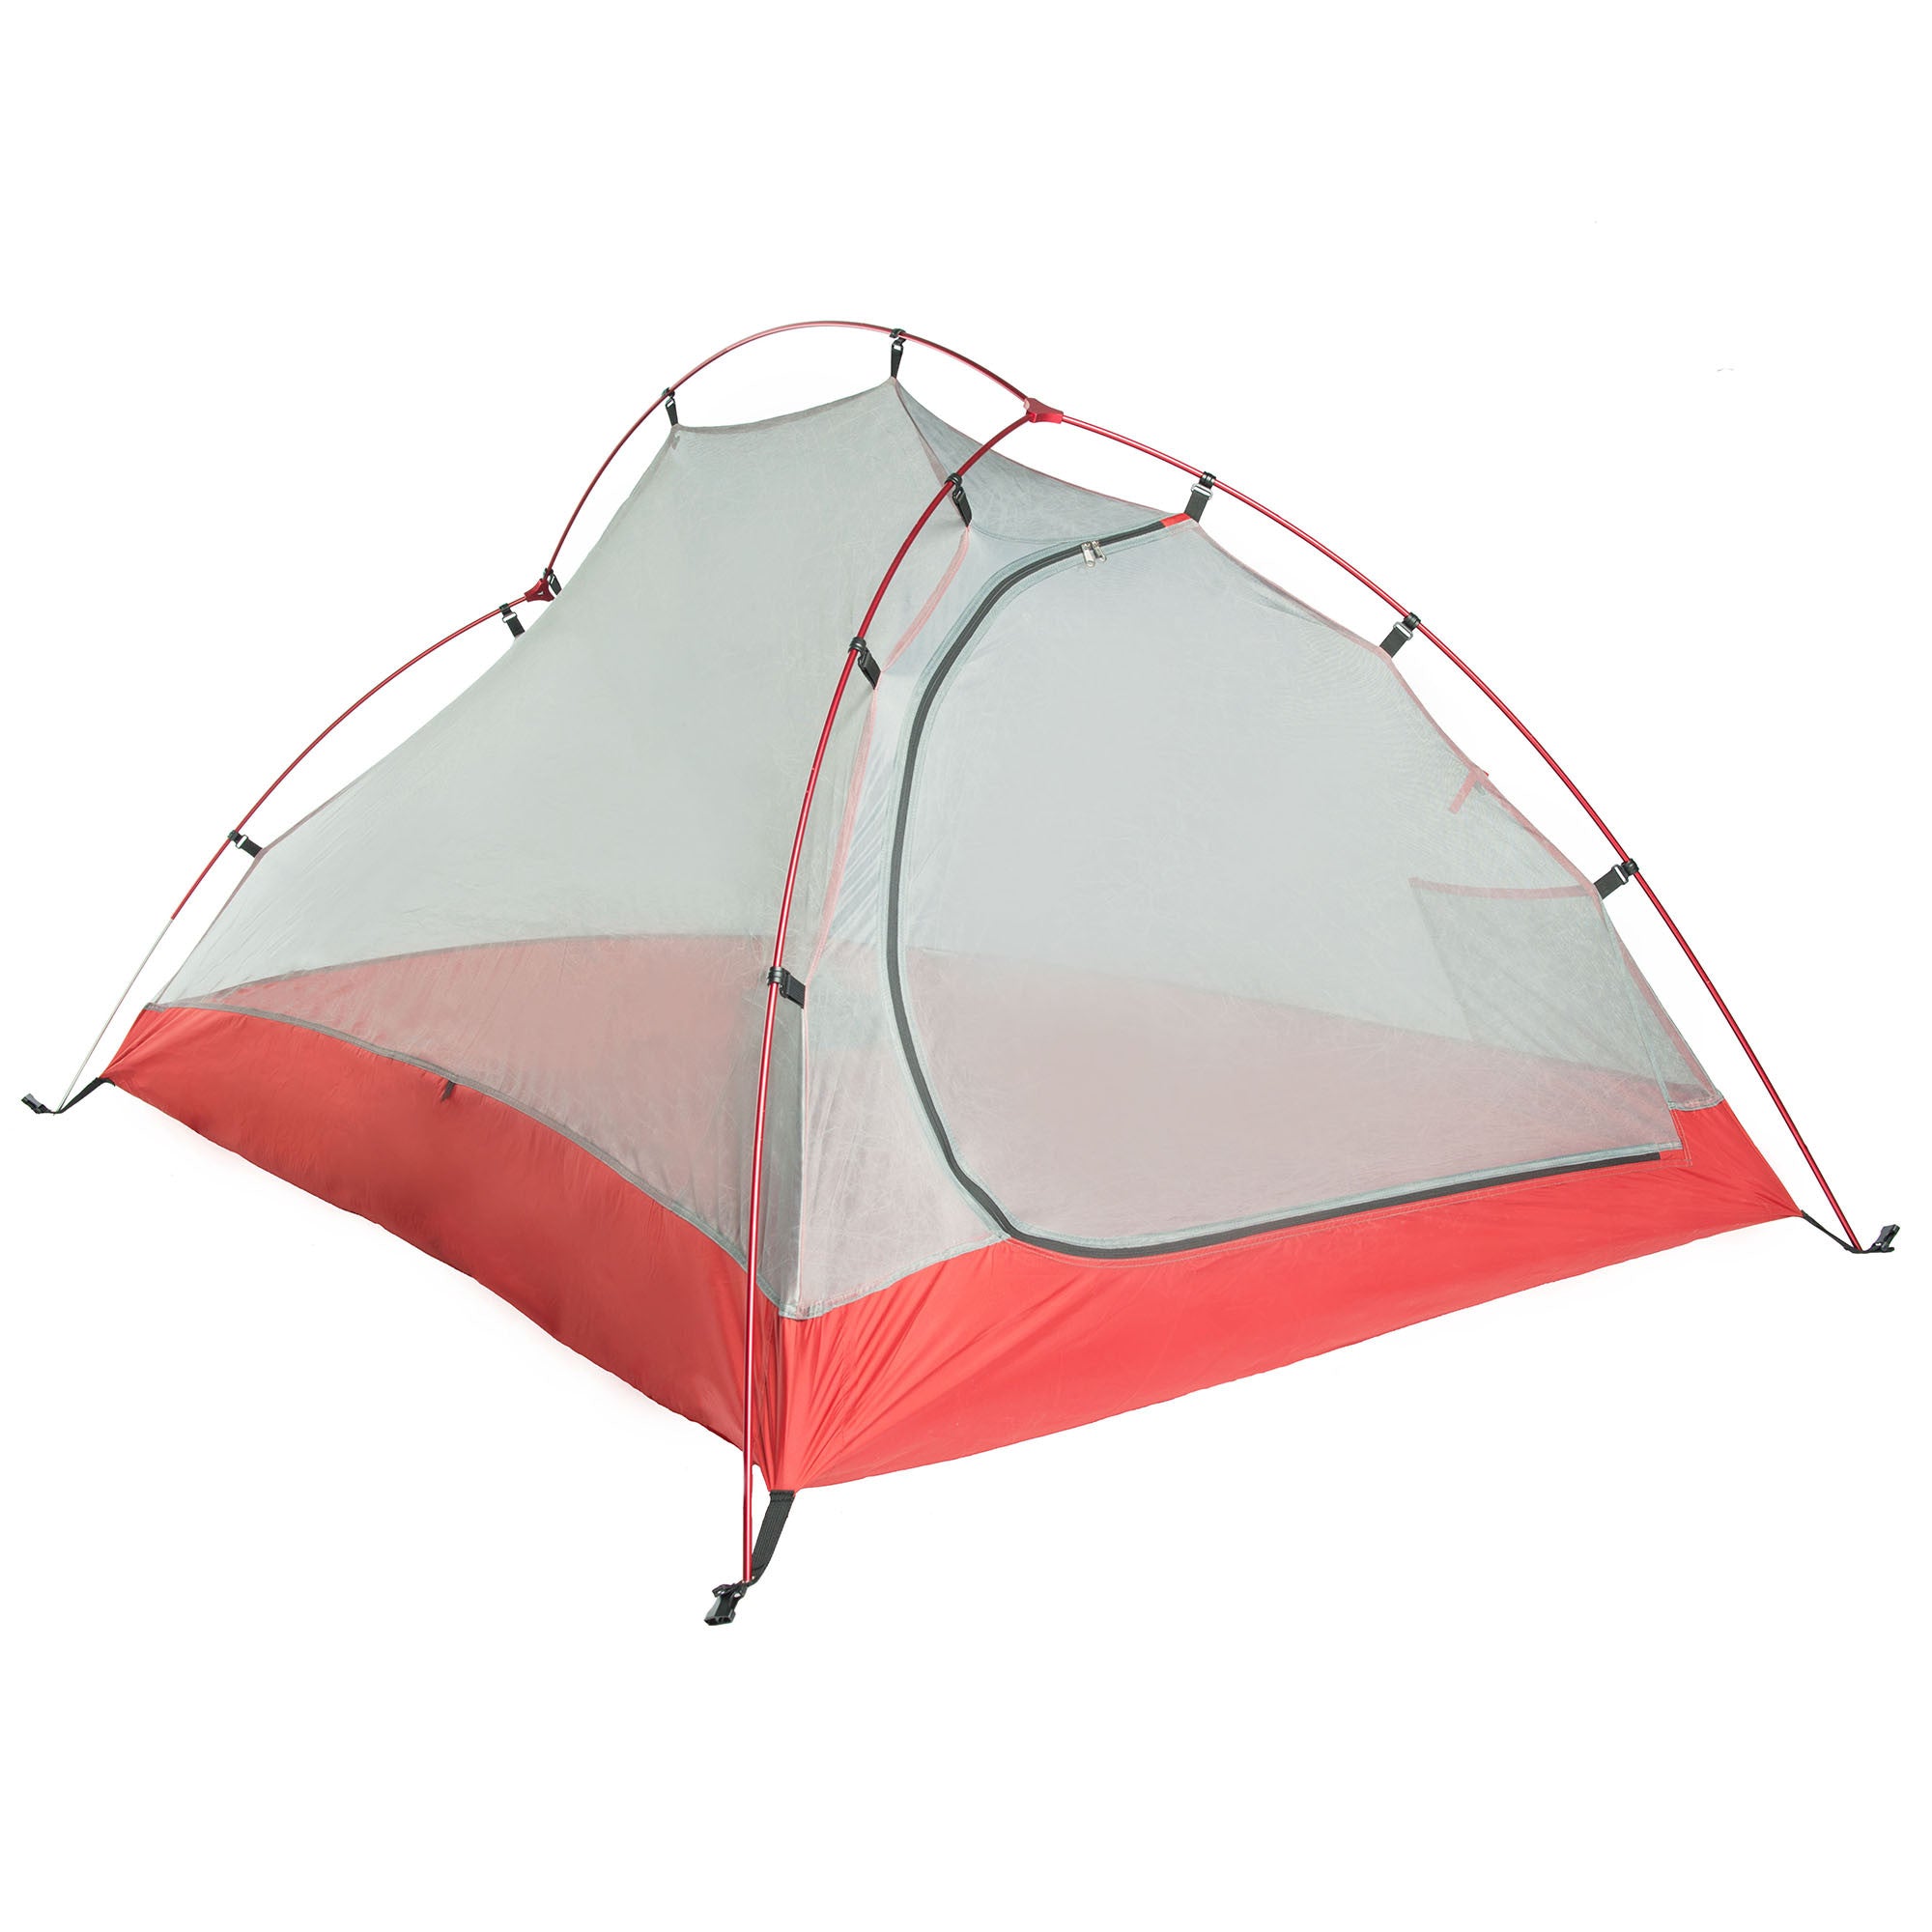 Paria Outdoor Products Bryce Ultralight Tent and Footprint - Perfect for Backpacking, Kayaking, Camping and Bikepacking (1P)